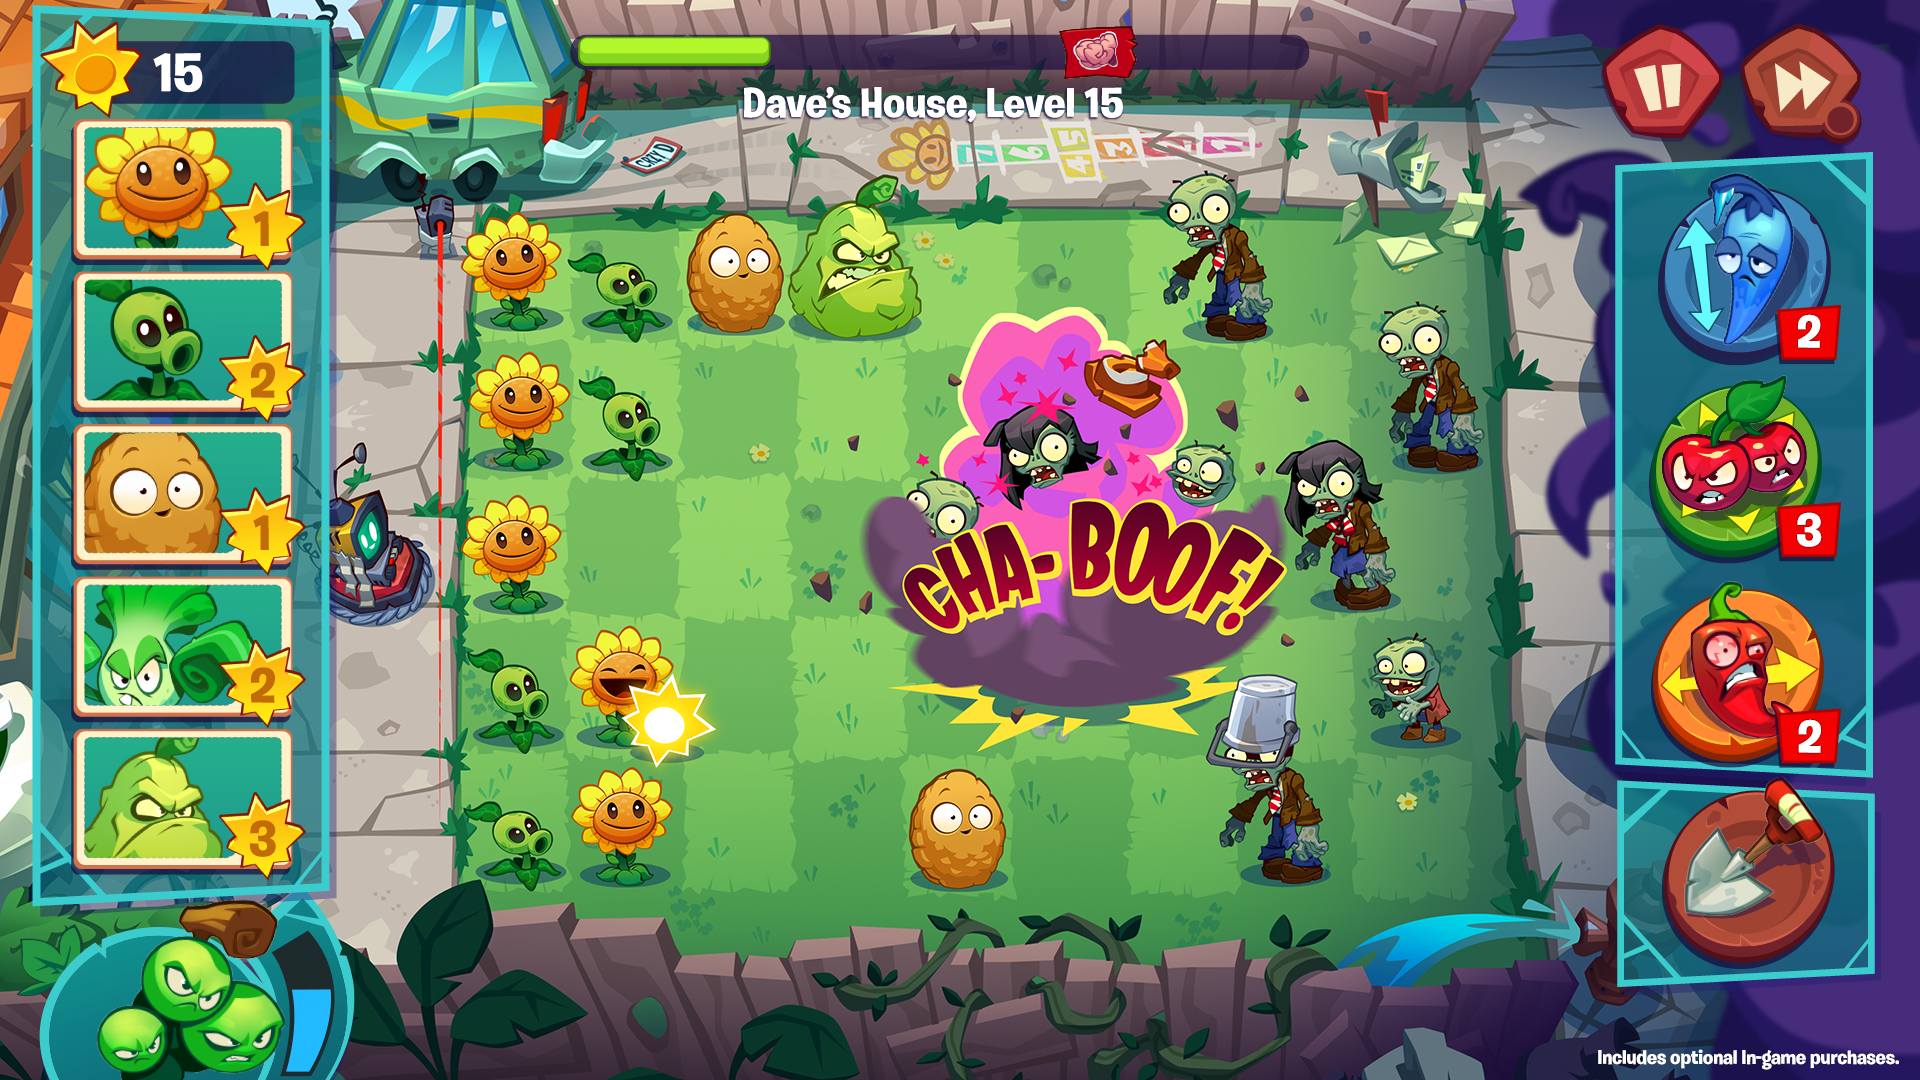 Plants Vs Zombies 3: Zomburbia Welcomes You - Expected Release This Year